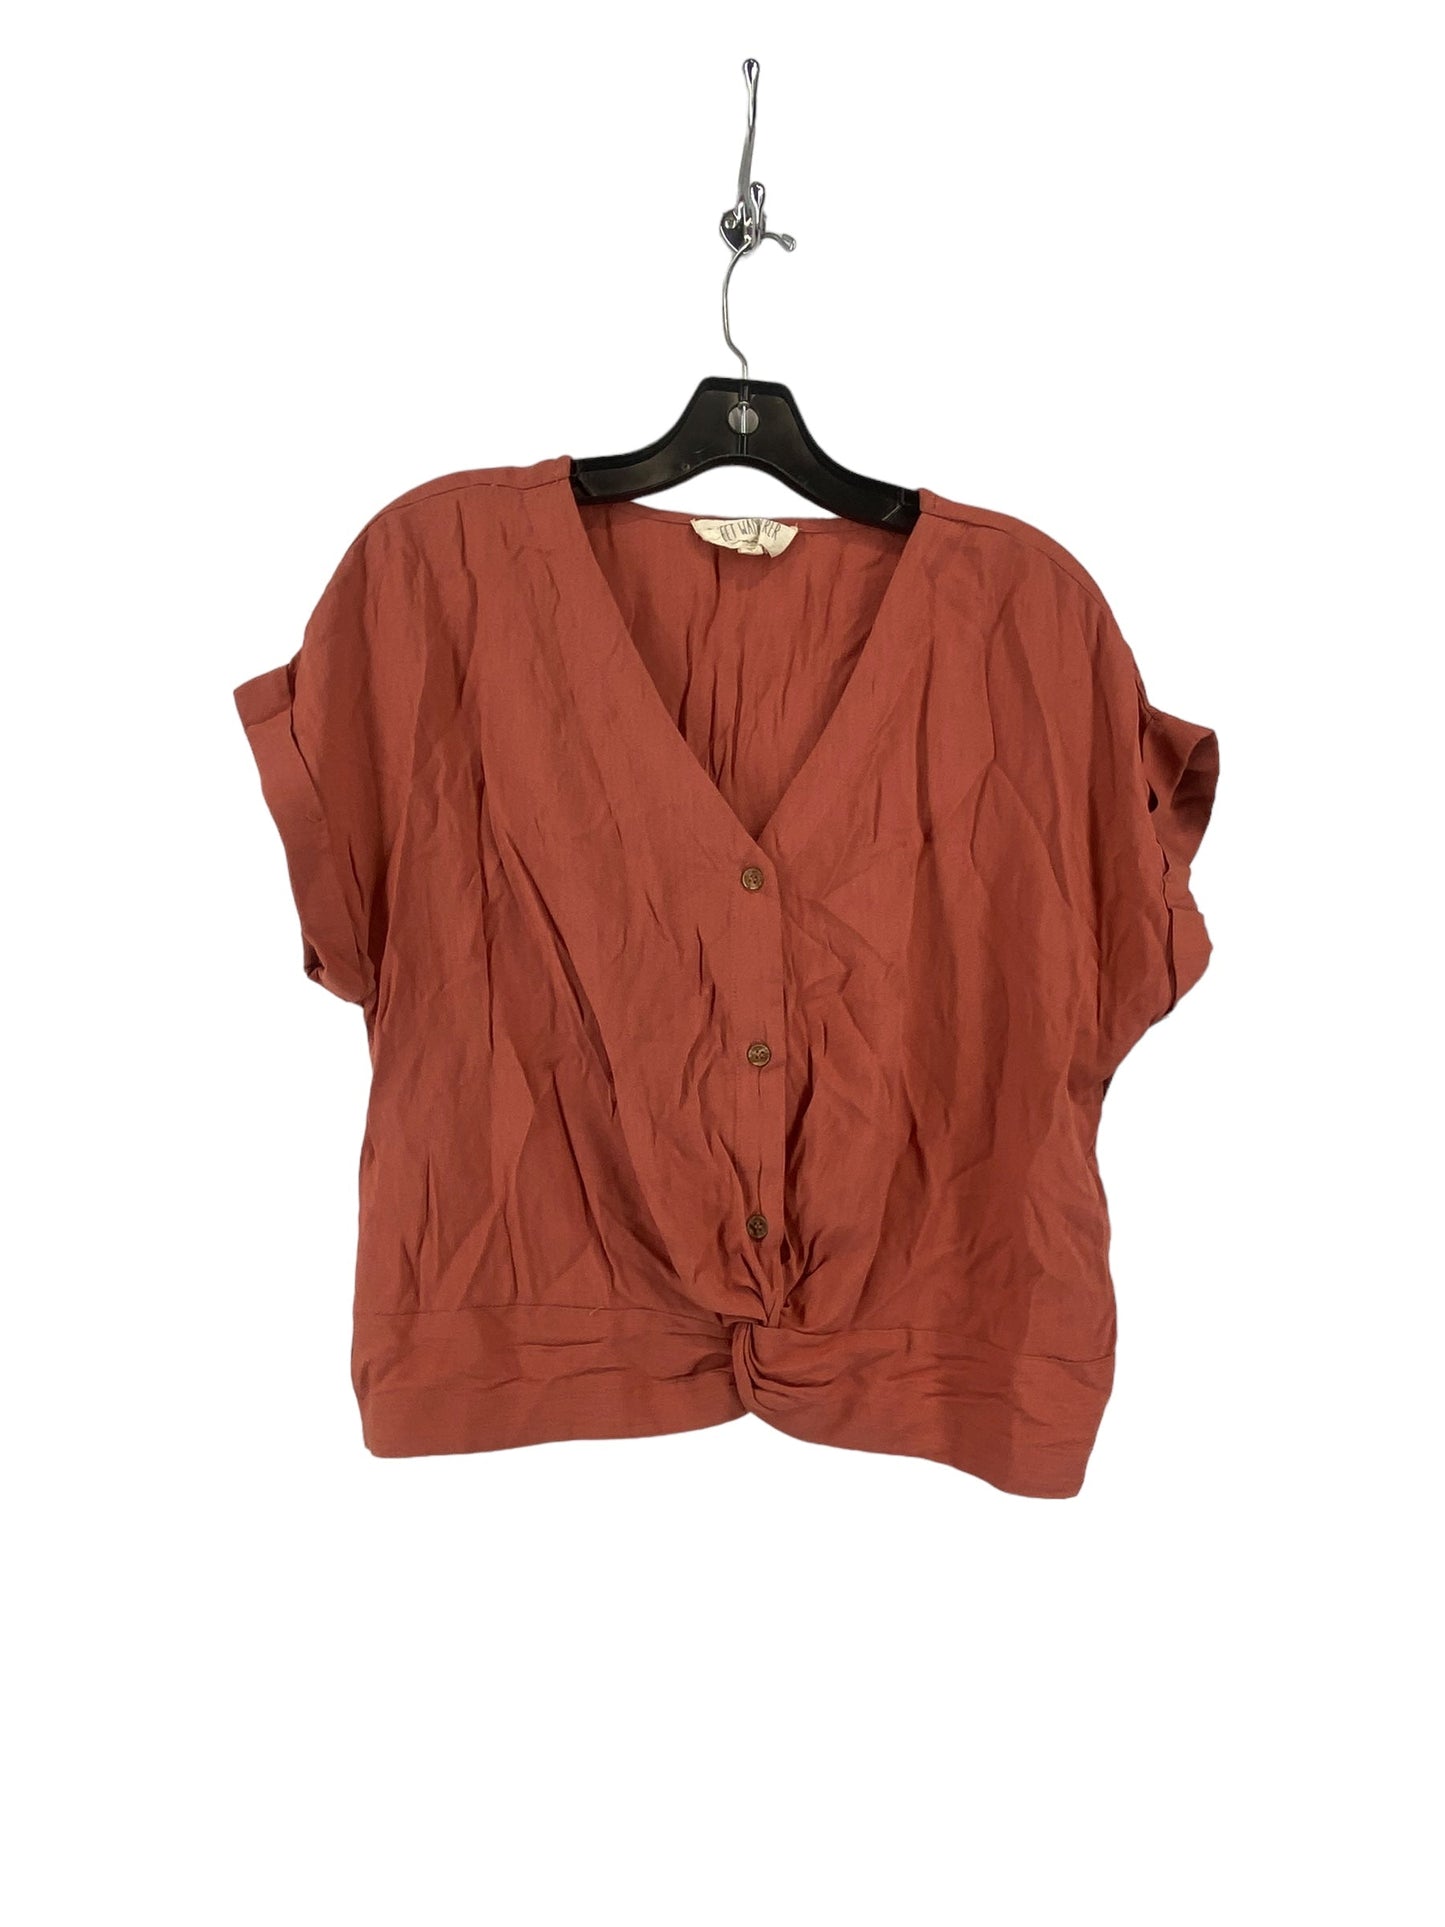 Red Top Short Sleeve Sweet Wanderer, Size L